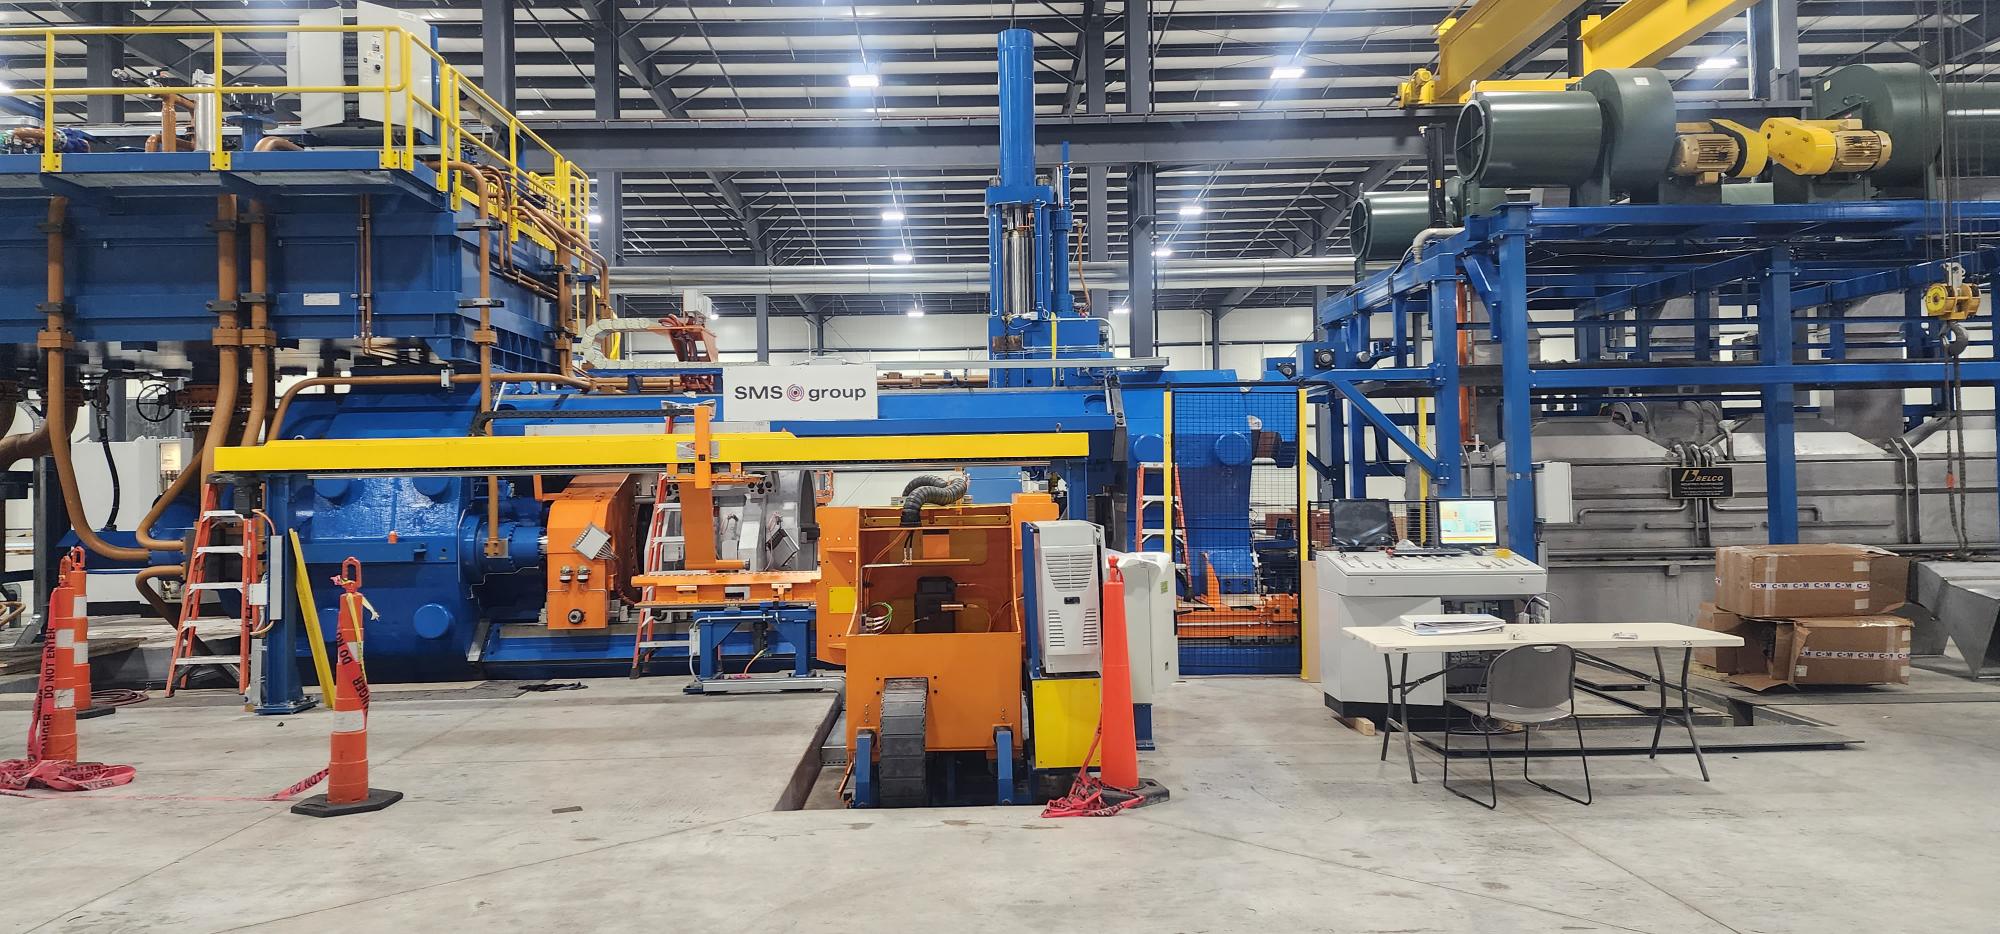 The new OMAV-built SMS press installed at EAC in Belding, MI. 